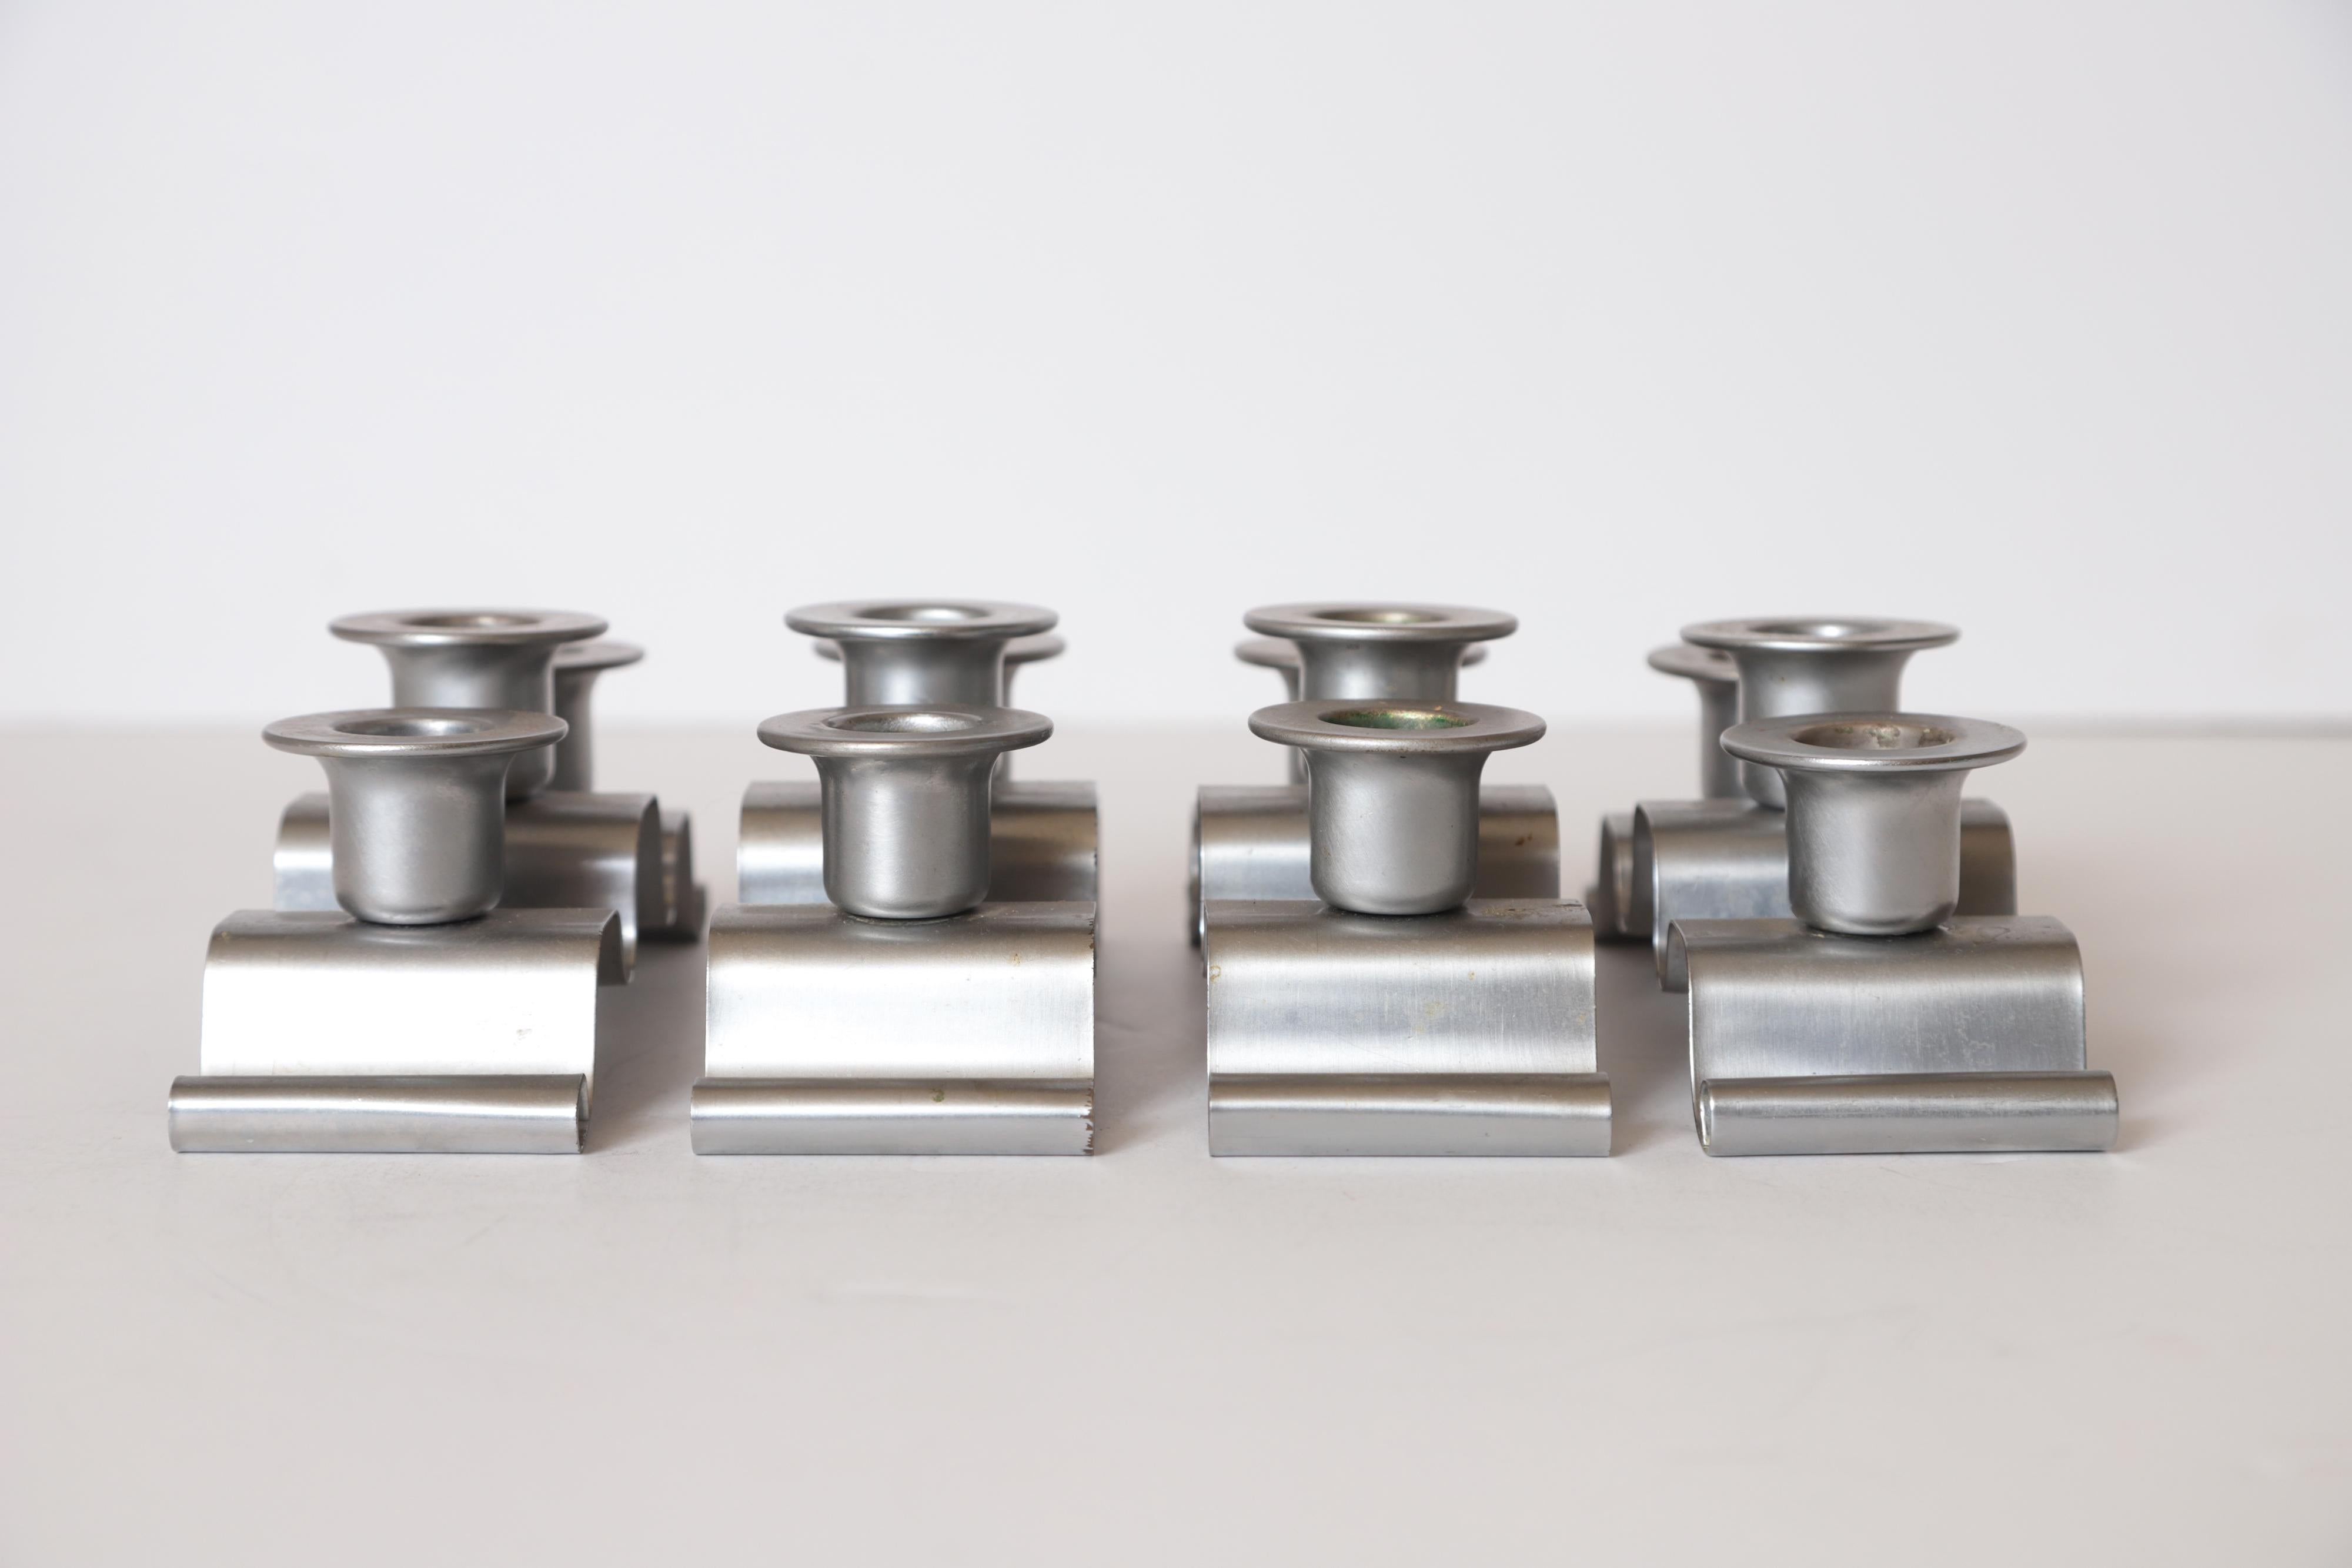 Plated Machine Age Art Deco Norman Bel Geddes Revere Tuxedo Candlestick Holders, Set 4 For Sale